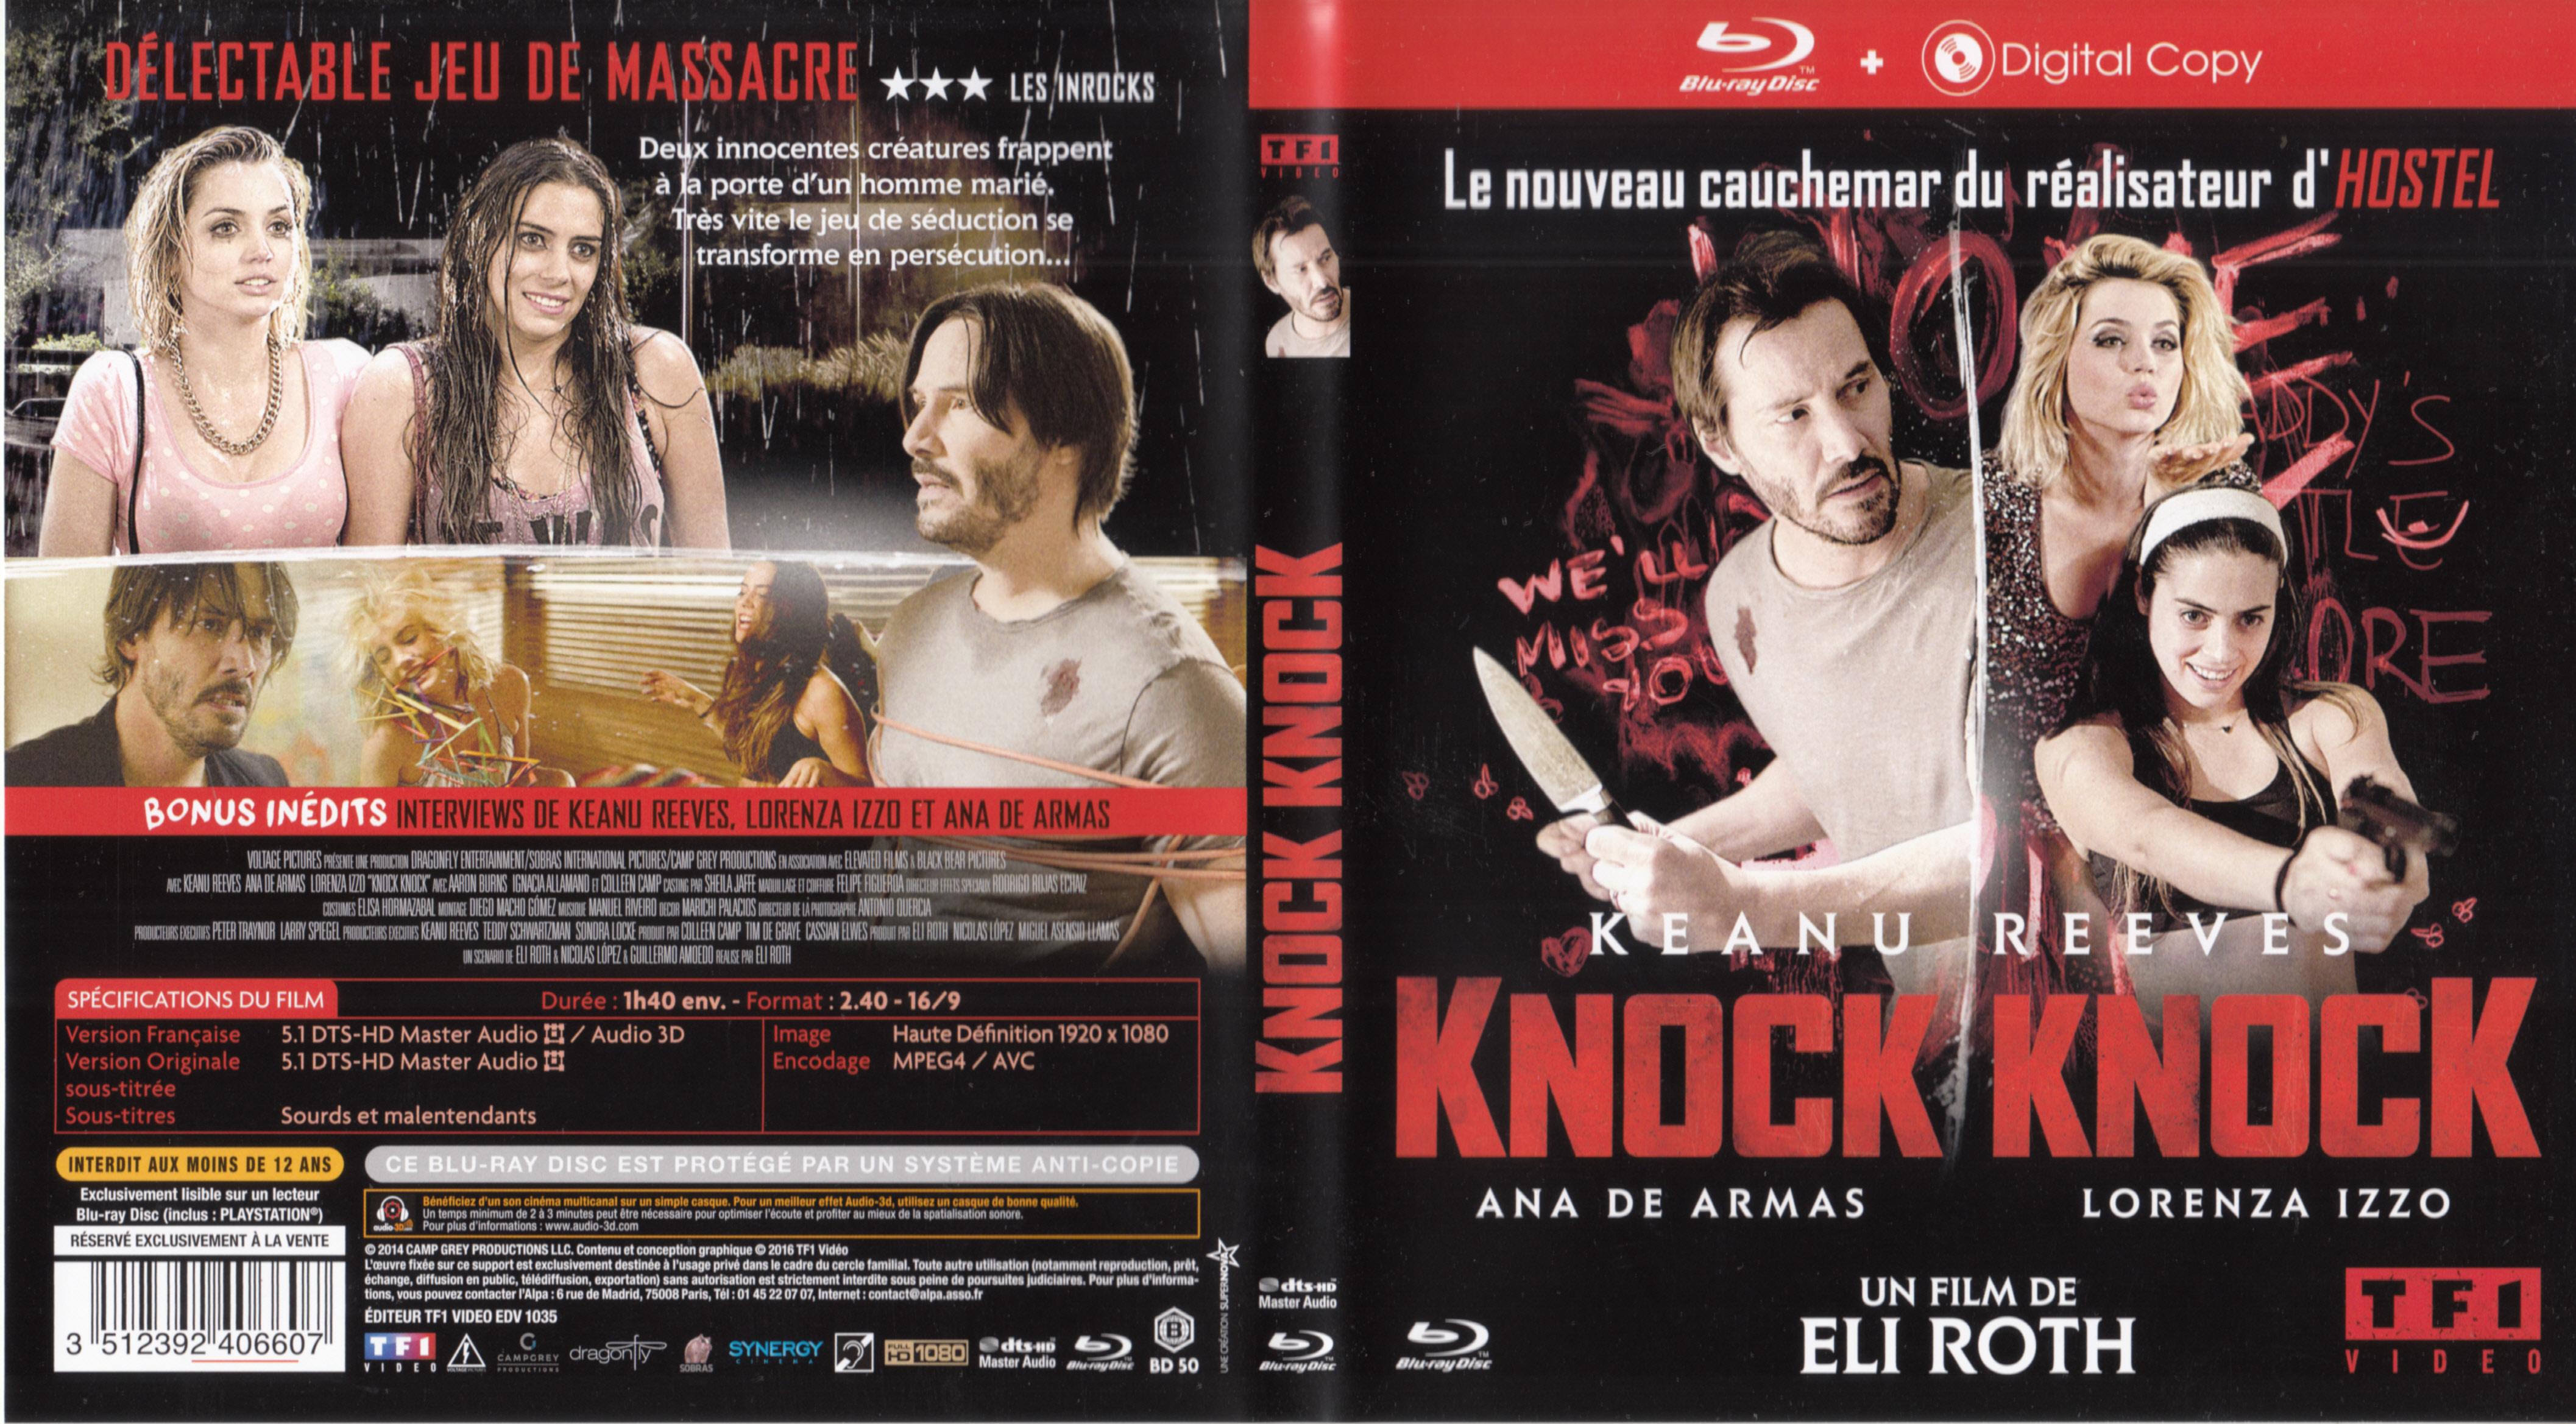 Jaquette DVD Knock Knock (BLU-RAY)